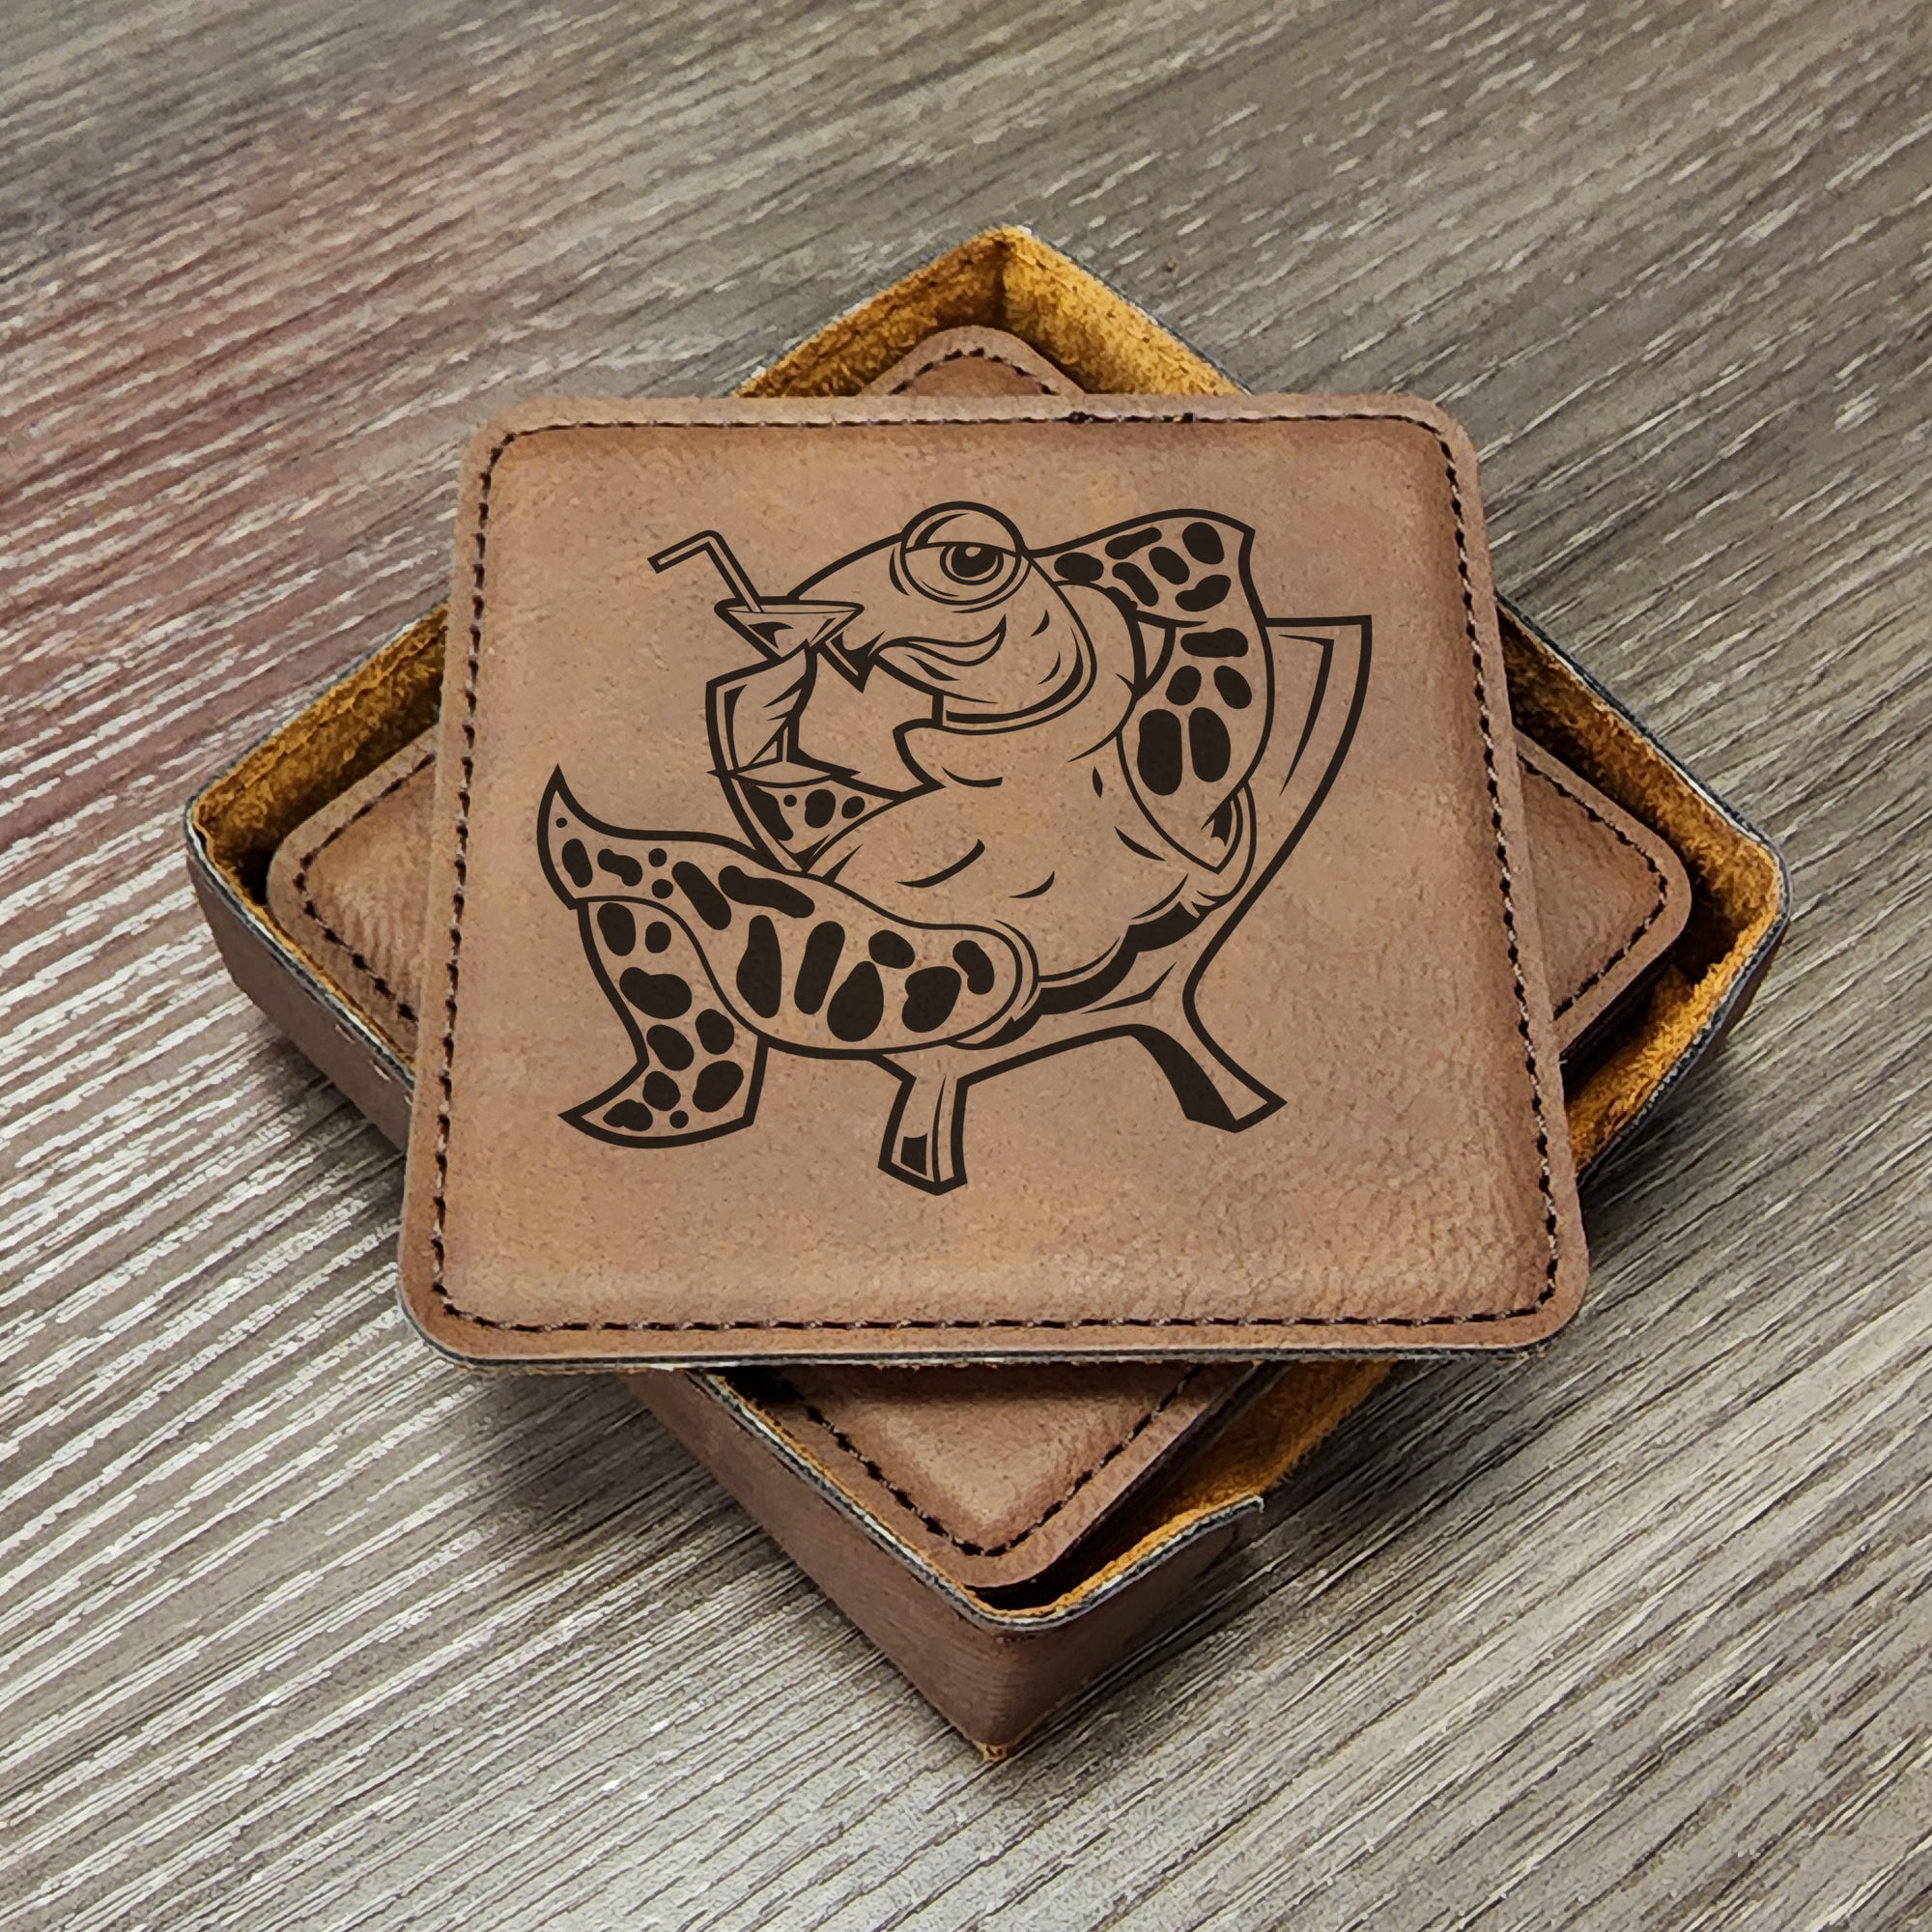 Turtle Martini Cocktail Mascot Leather Coasters, Beach Gifts, Pool Coaster, She-Shed Coaster, Mancave Barware Coasters, Set of 6 With Holder